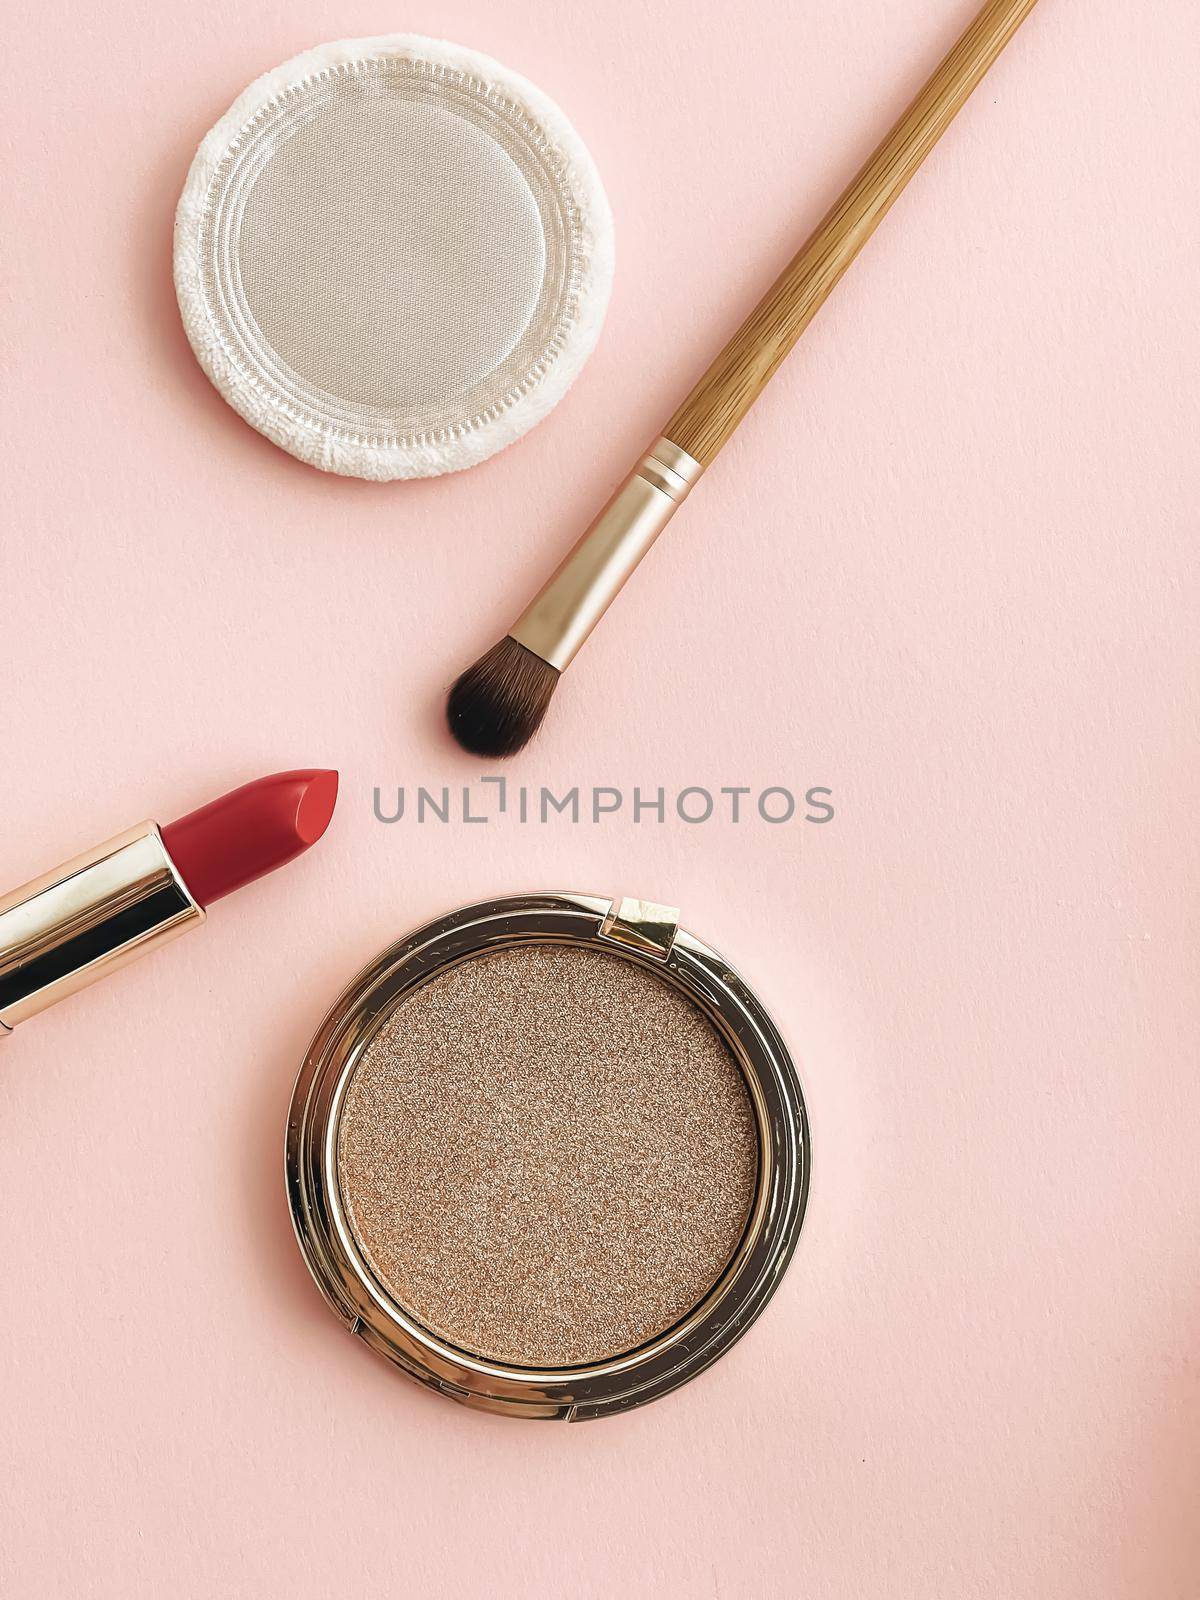 Beauty, make-up and cosmetics flatlay design with copyspace, cosmetic products and makeup tools on peach background, girly and feminine style concept